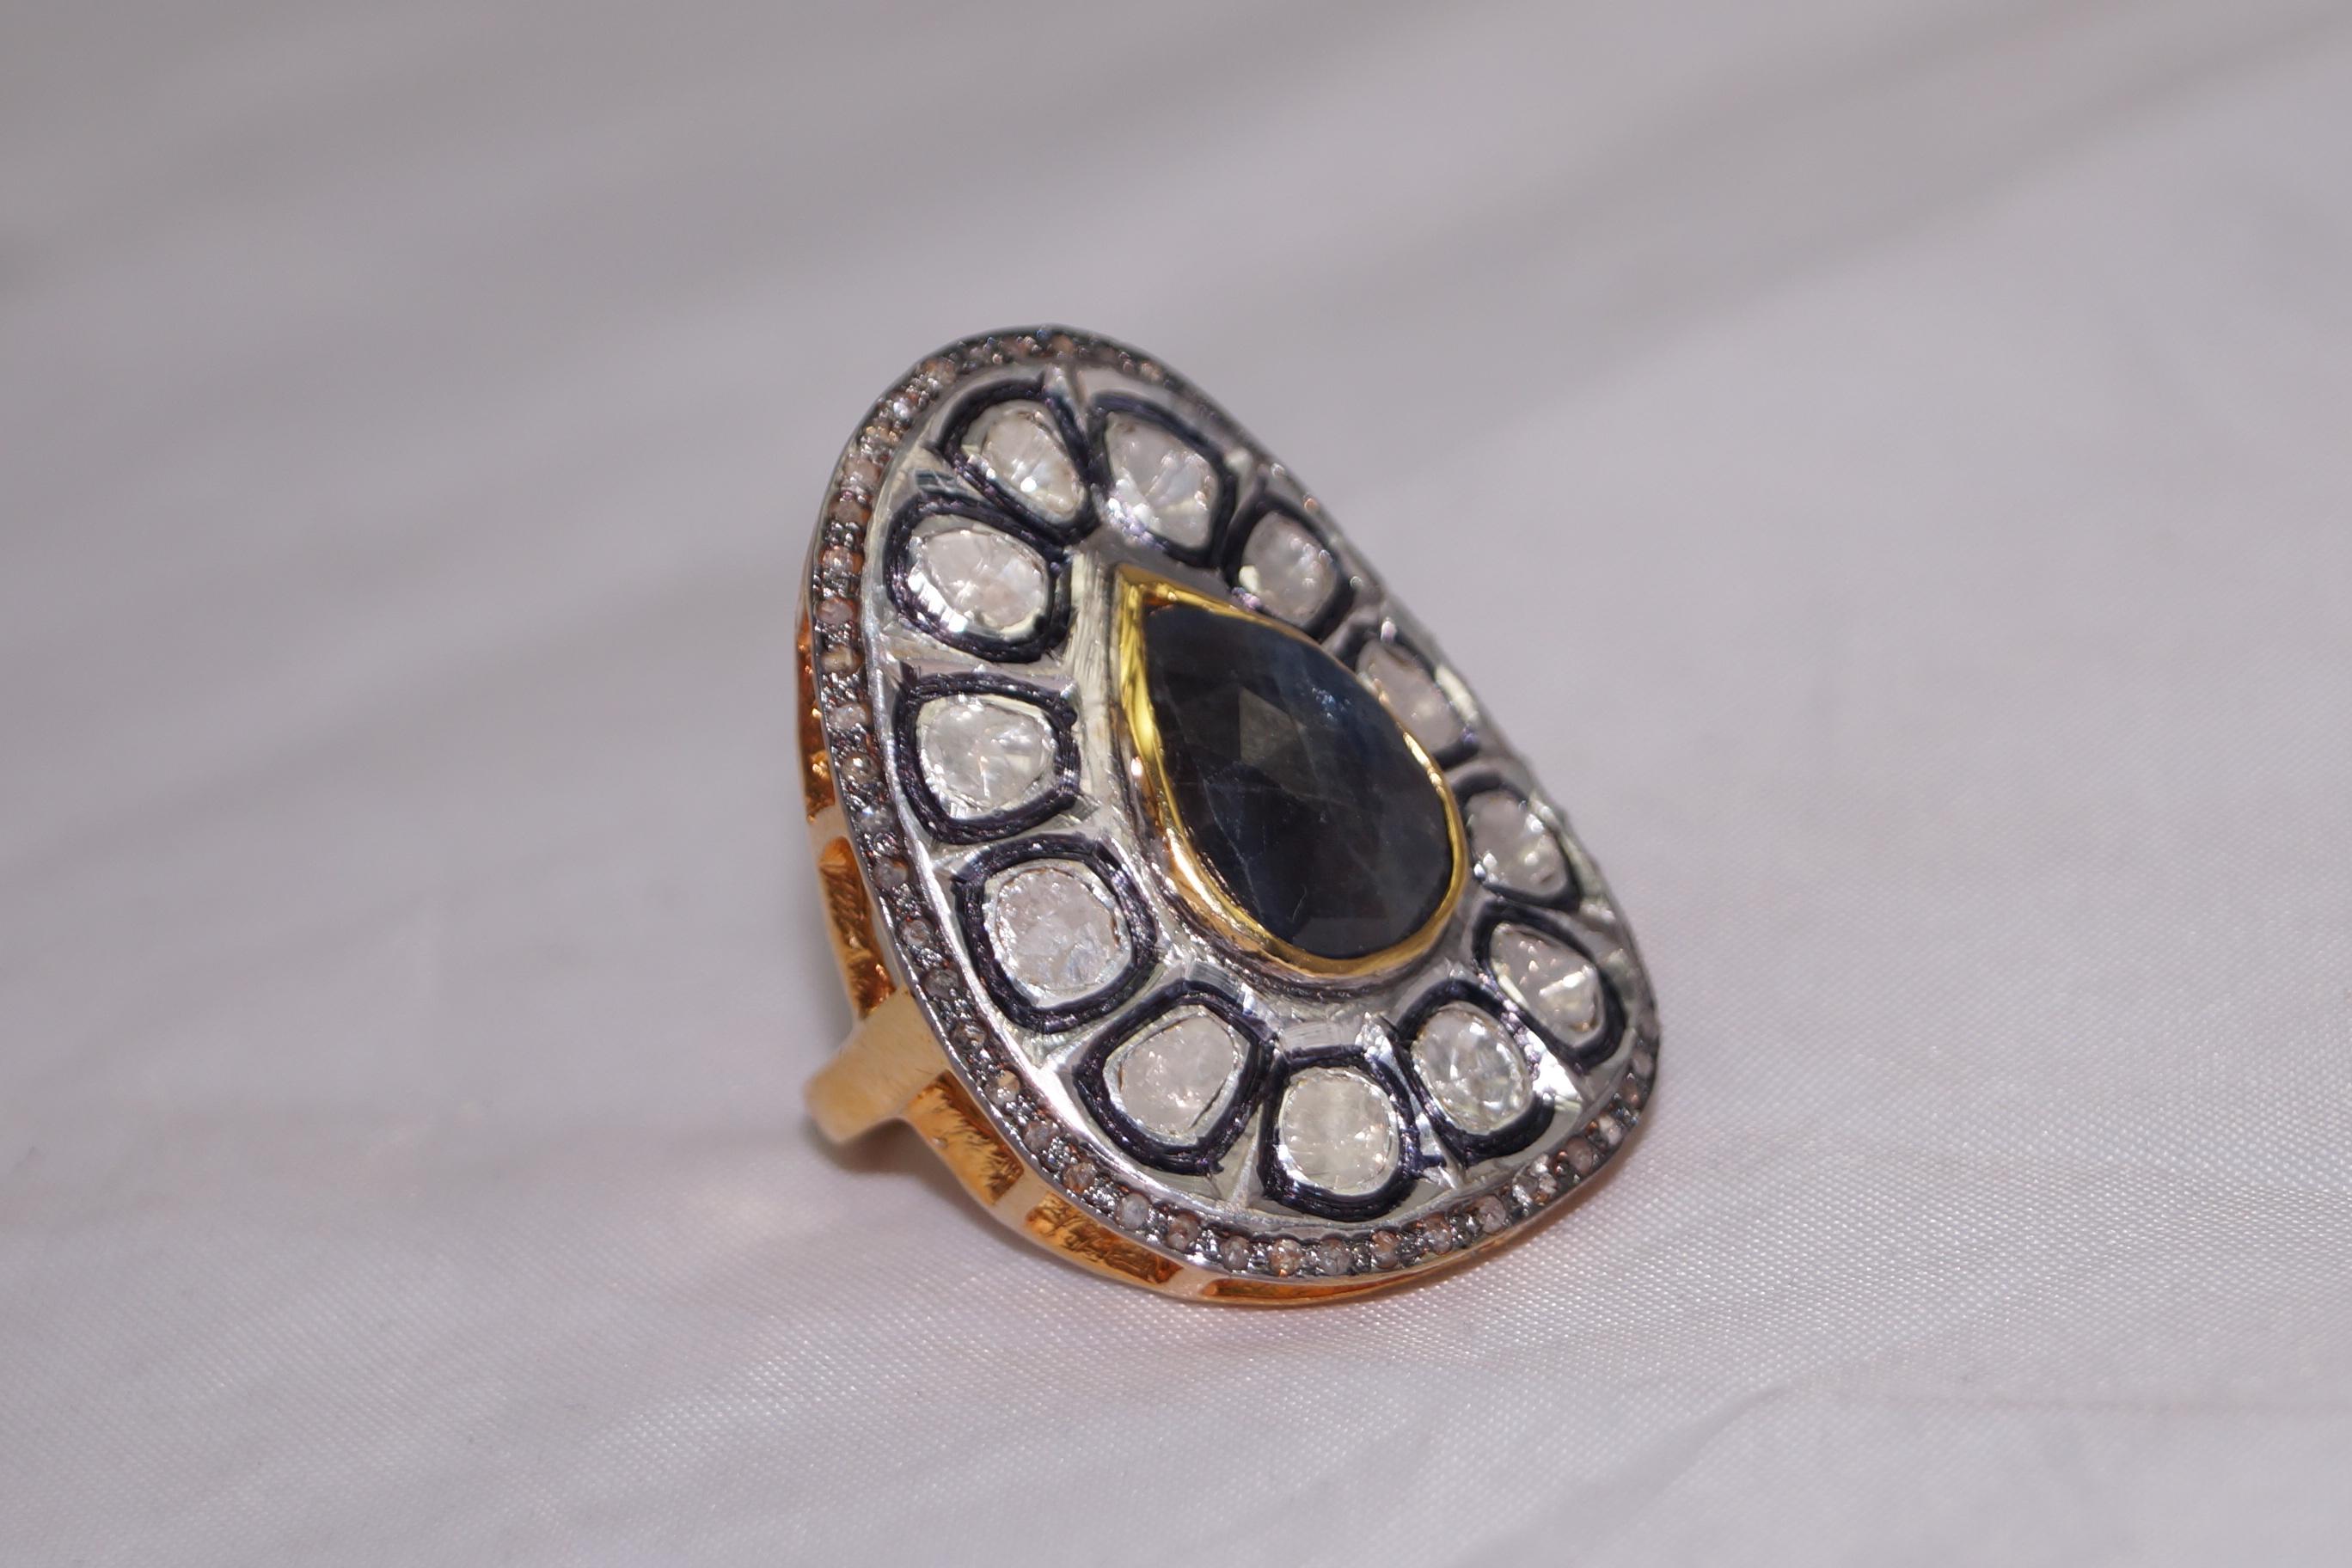 -Diamond type- Natural rose cut, natural uncut diamond

-Diamond color- white with a tint of grey

-Diamond weight- 3.60ctw

-Metal- 925 Sterling silver

Metal color- oxidized silver and yellow gold plated

Gemstone- blue sapphire (Lab created)

